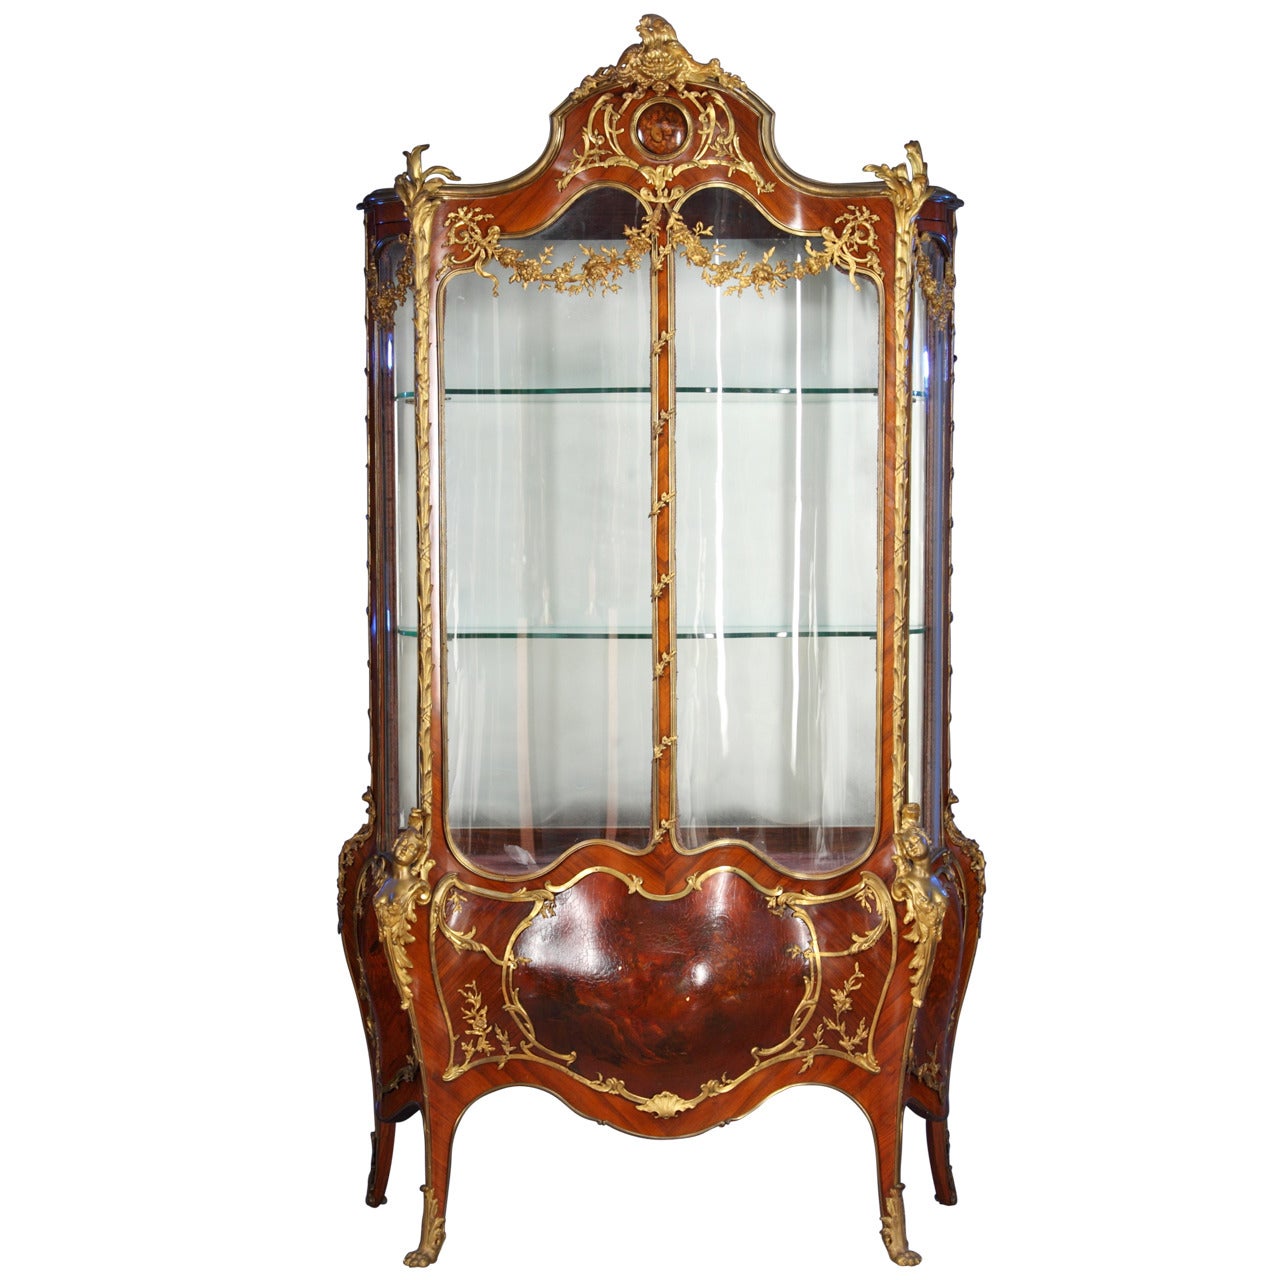 A Very Fine French 19th CenturyOrmolu-Mounted Louis XV Style Double-Door Vitrine For Sale